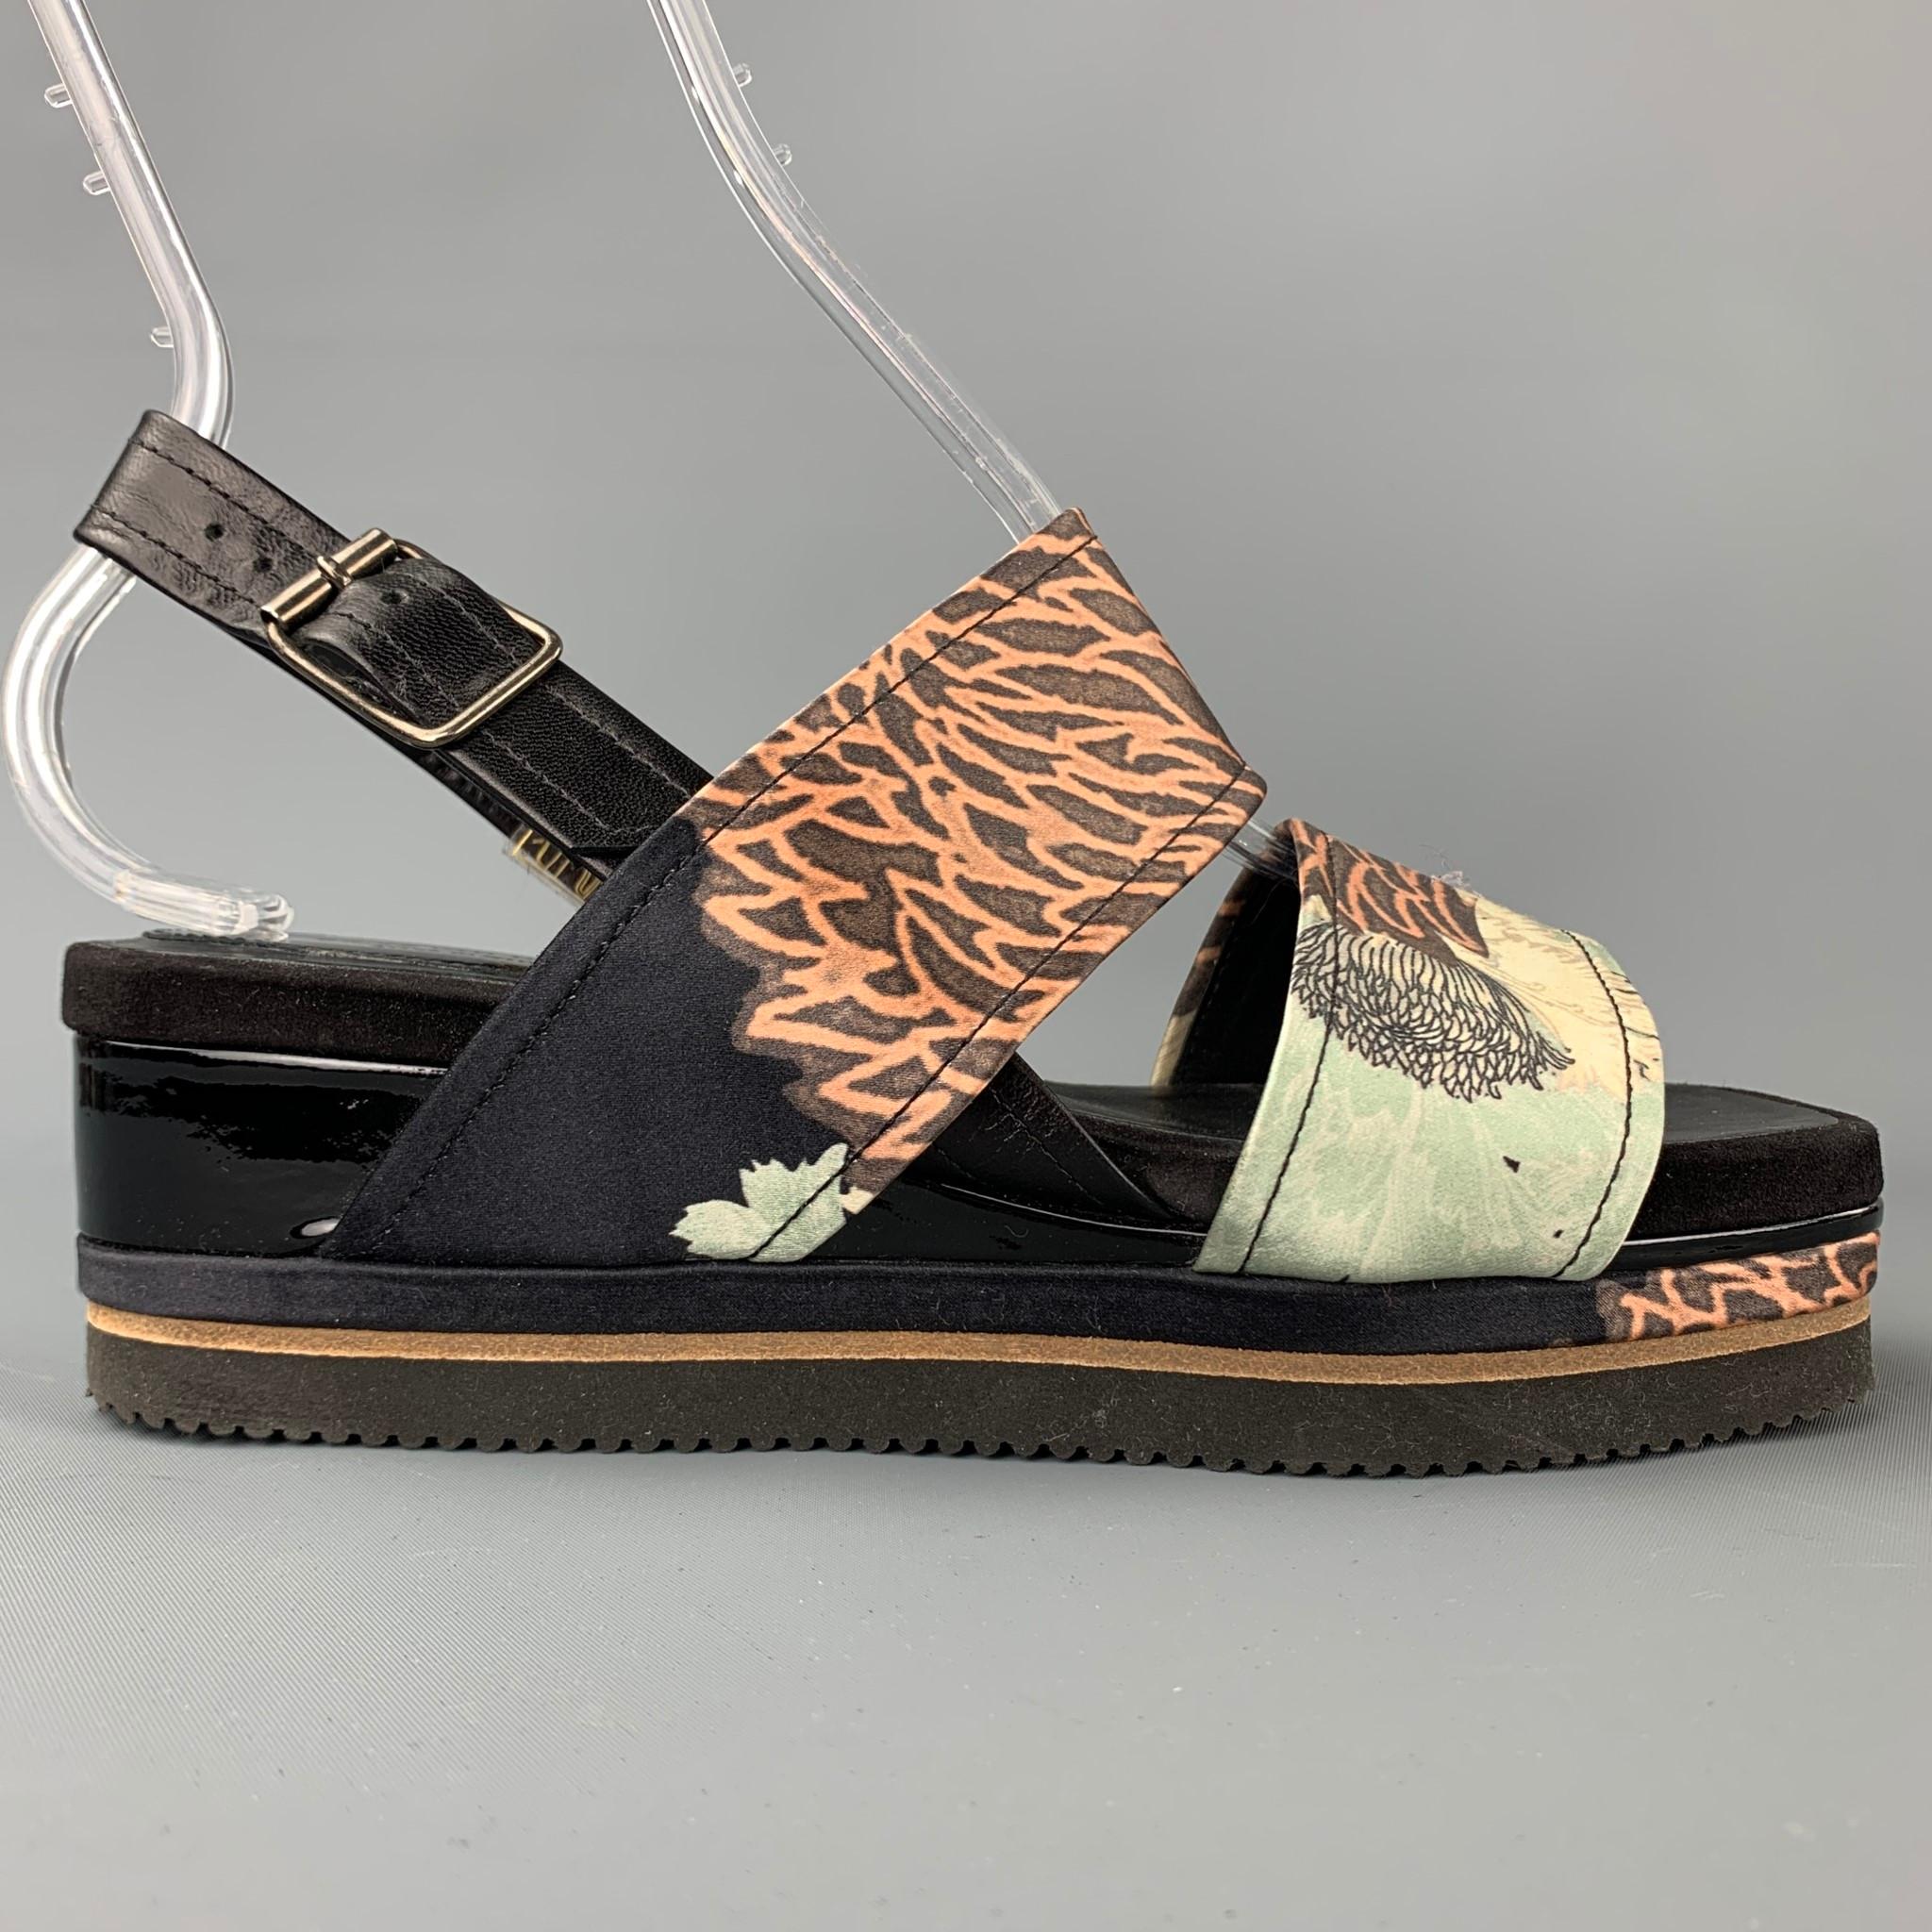 DRIES VAN NOTEN sandals comes in a multi-color tapestry print silk with a patent leather trim featuring a platform style and a slingback closure. Made in Italy.

Very Good Pre-Owned Condition.
Marked: EU 38.5

Measurements:

Platform: 2.25 in. 